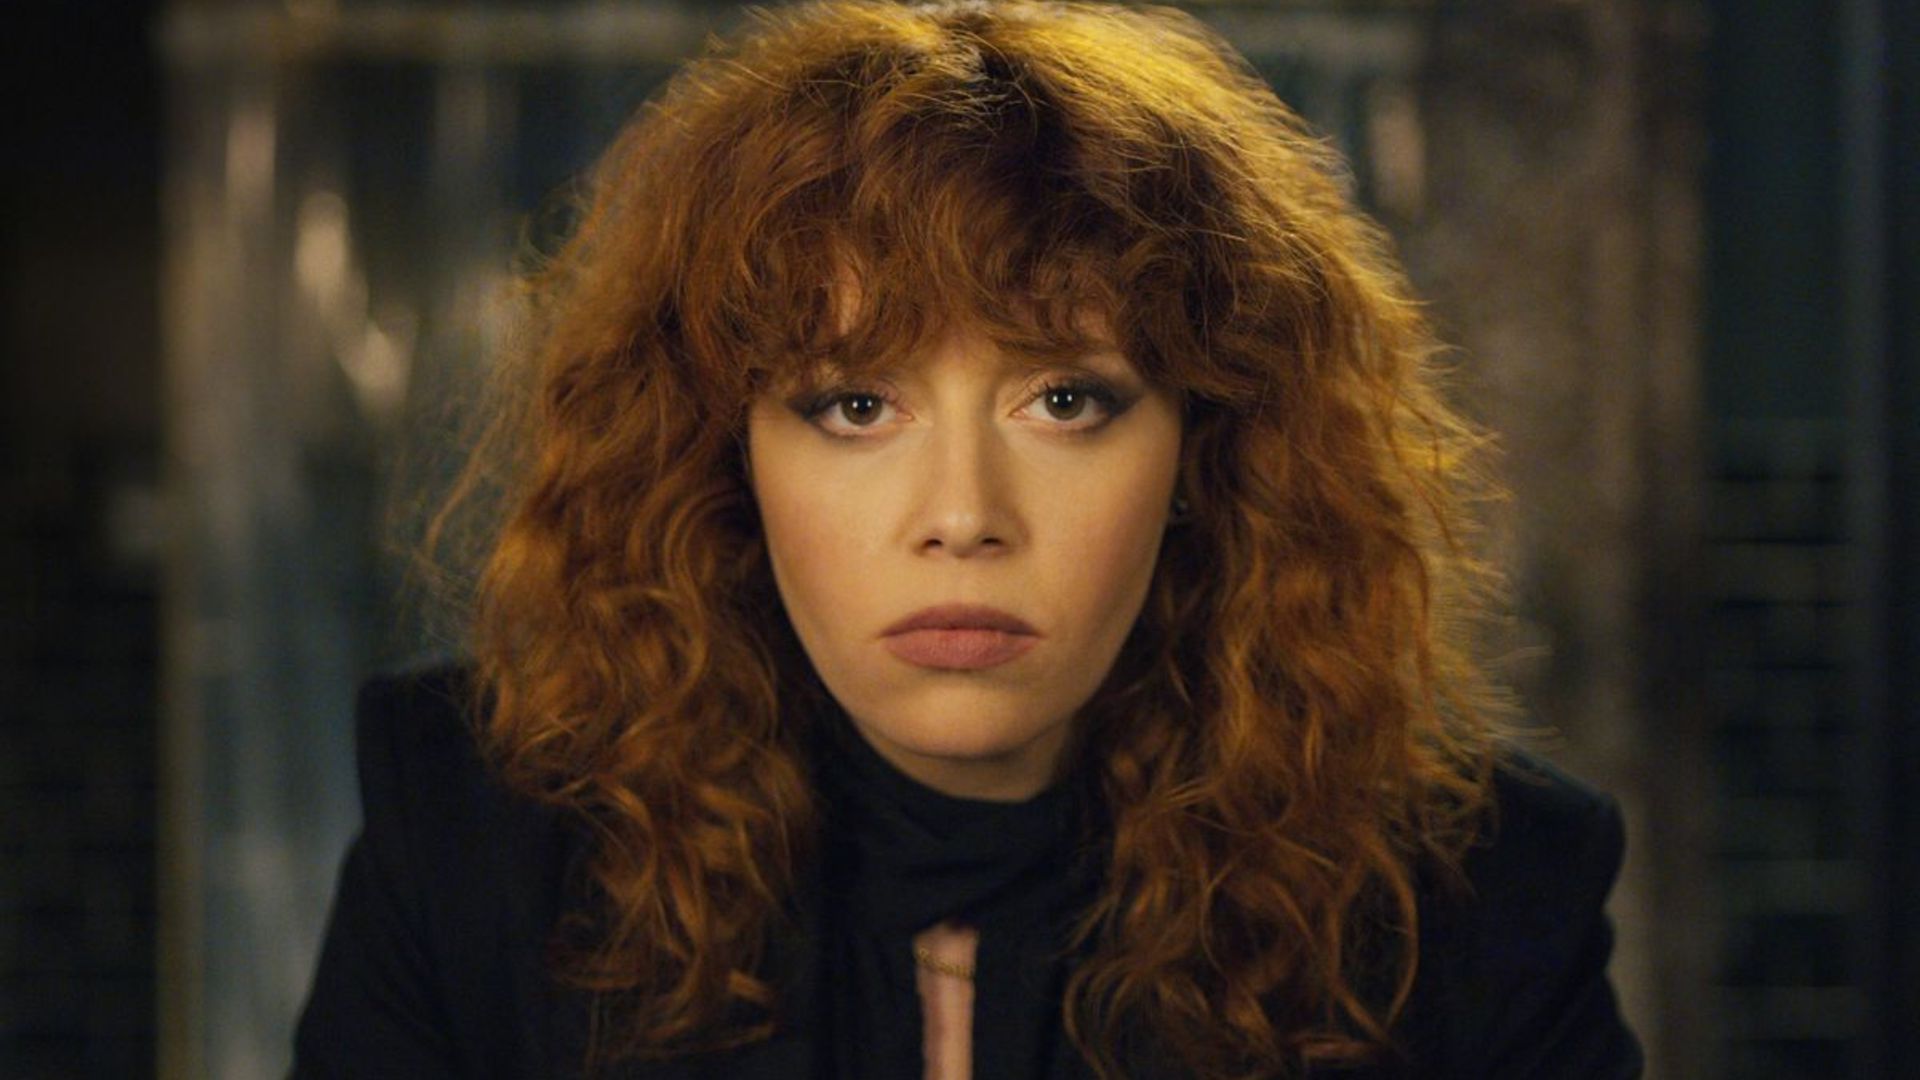 Russian Doll – one of the best Netflix shows